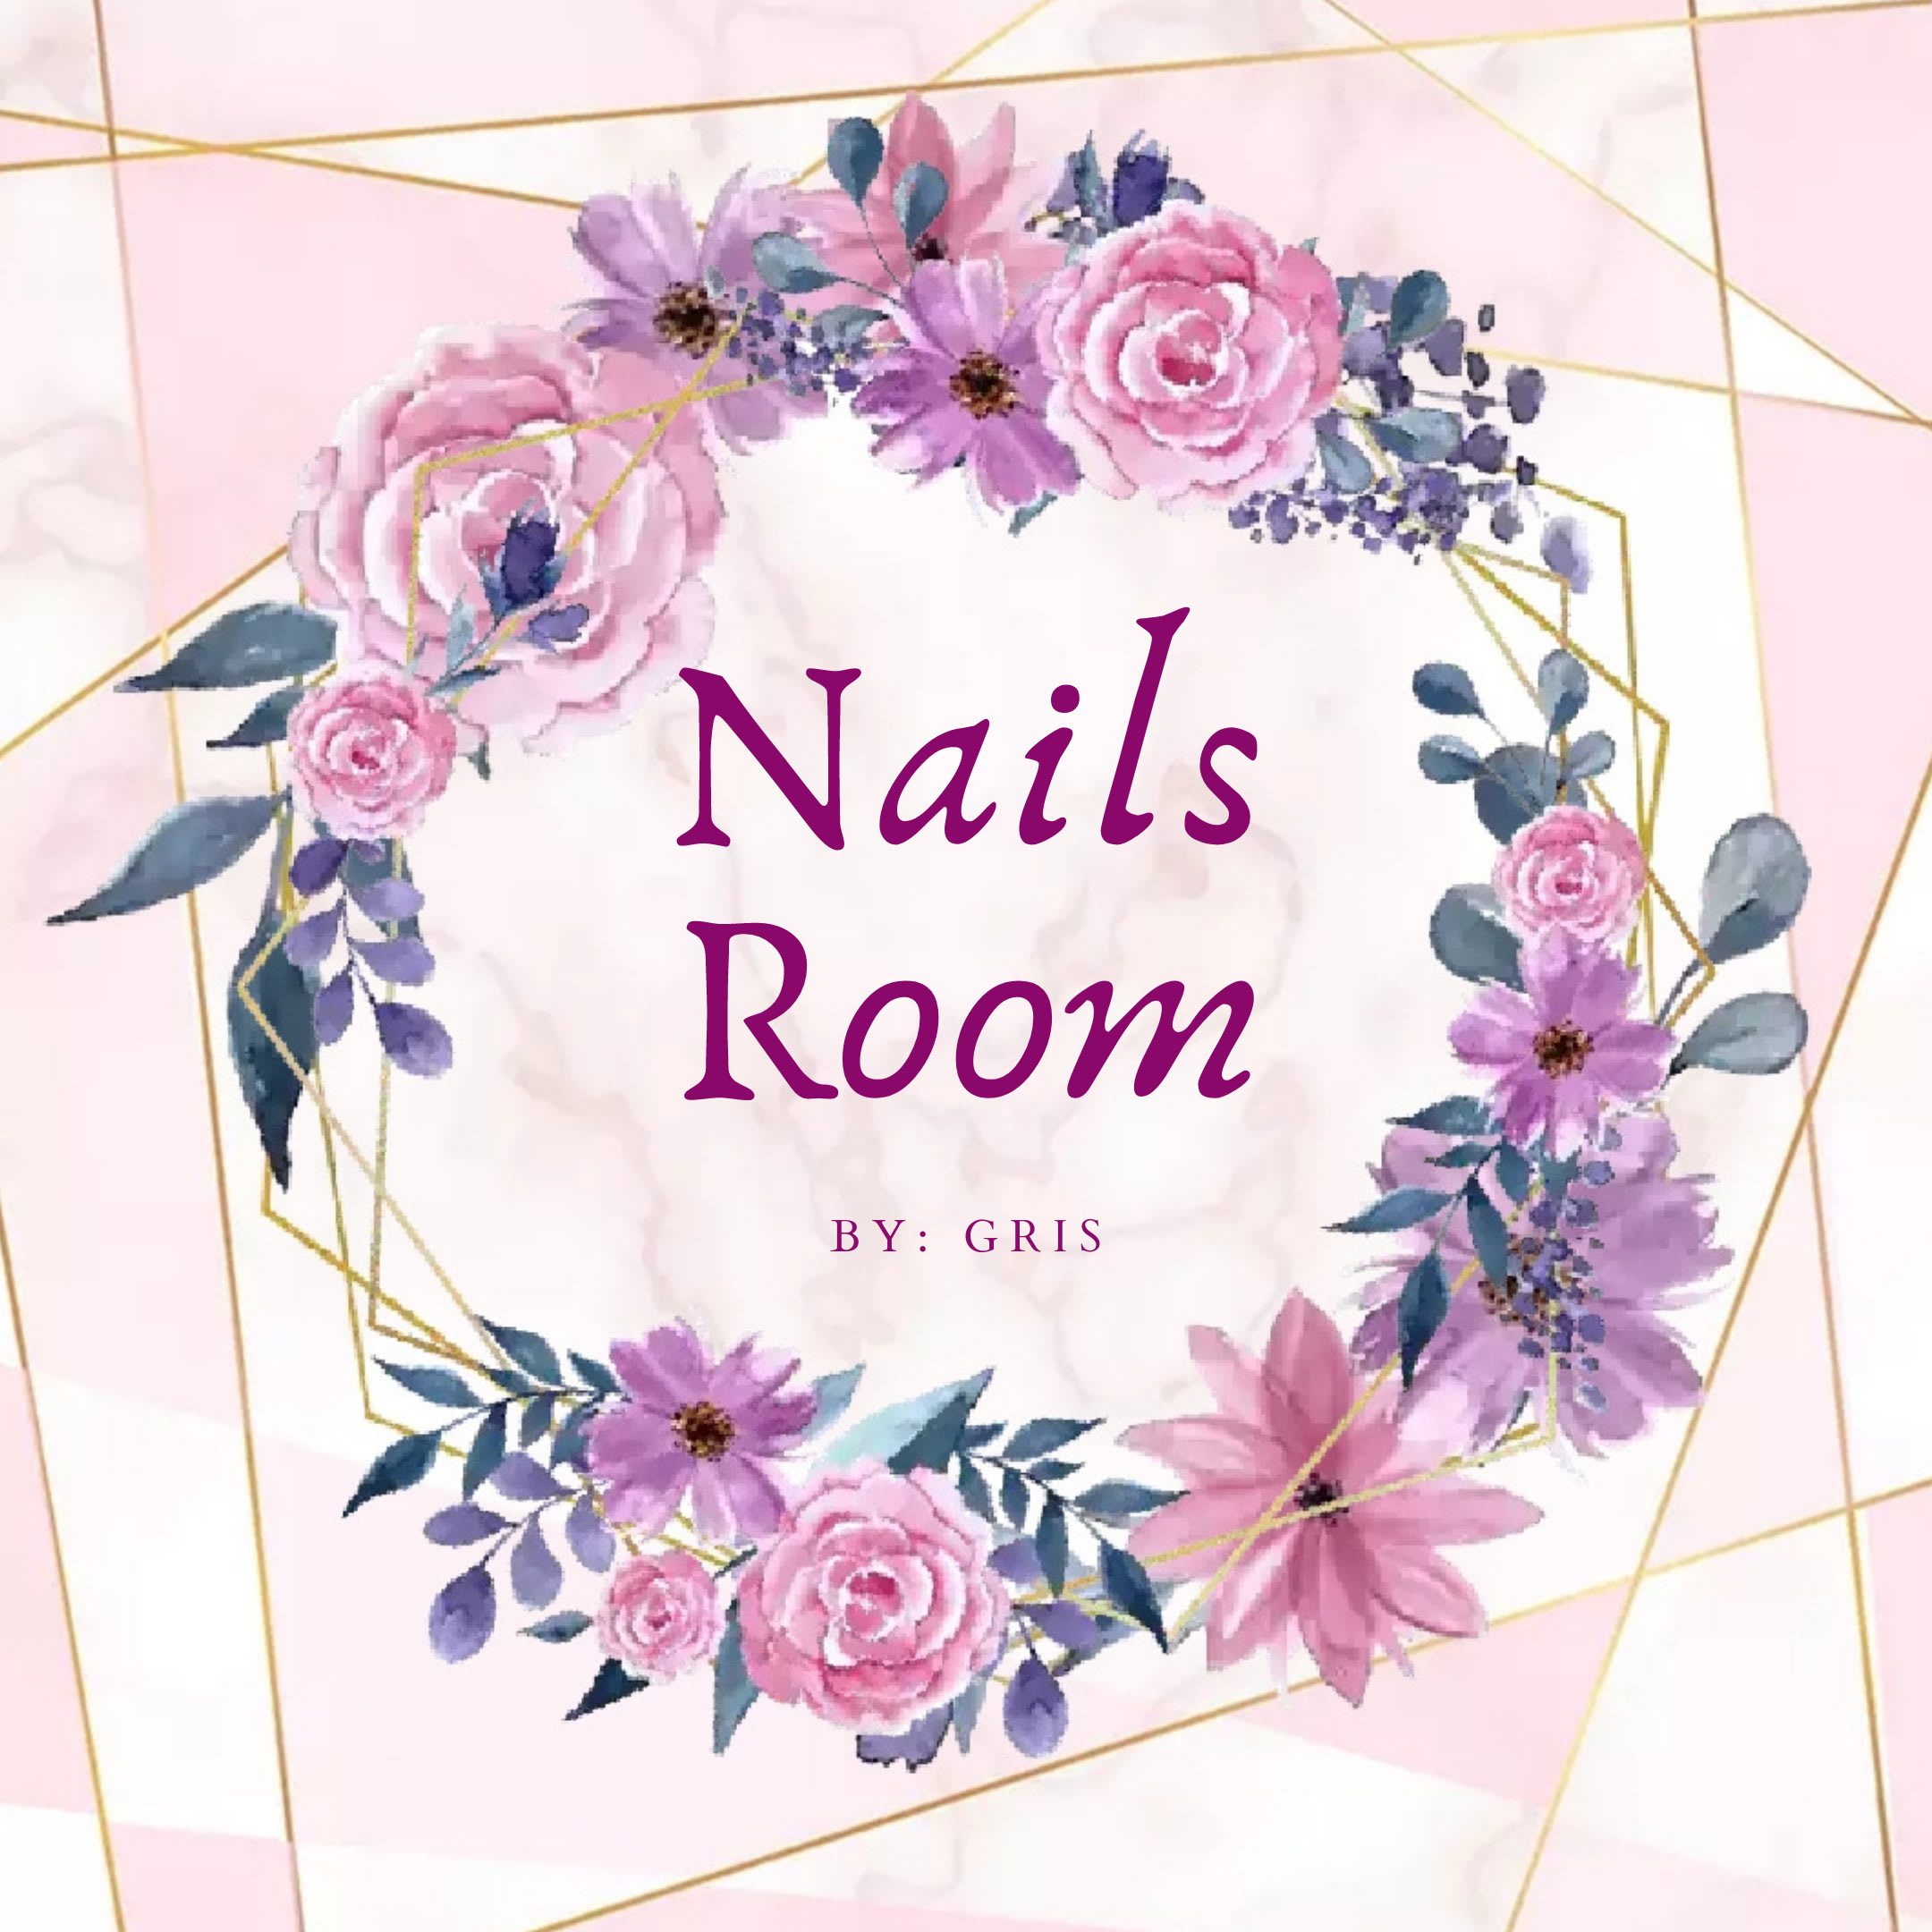 Nails Room by Gris